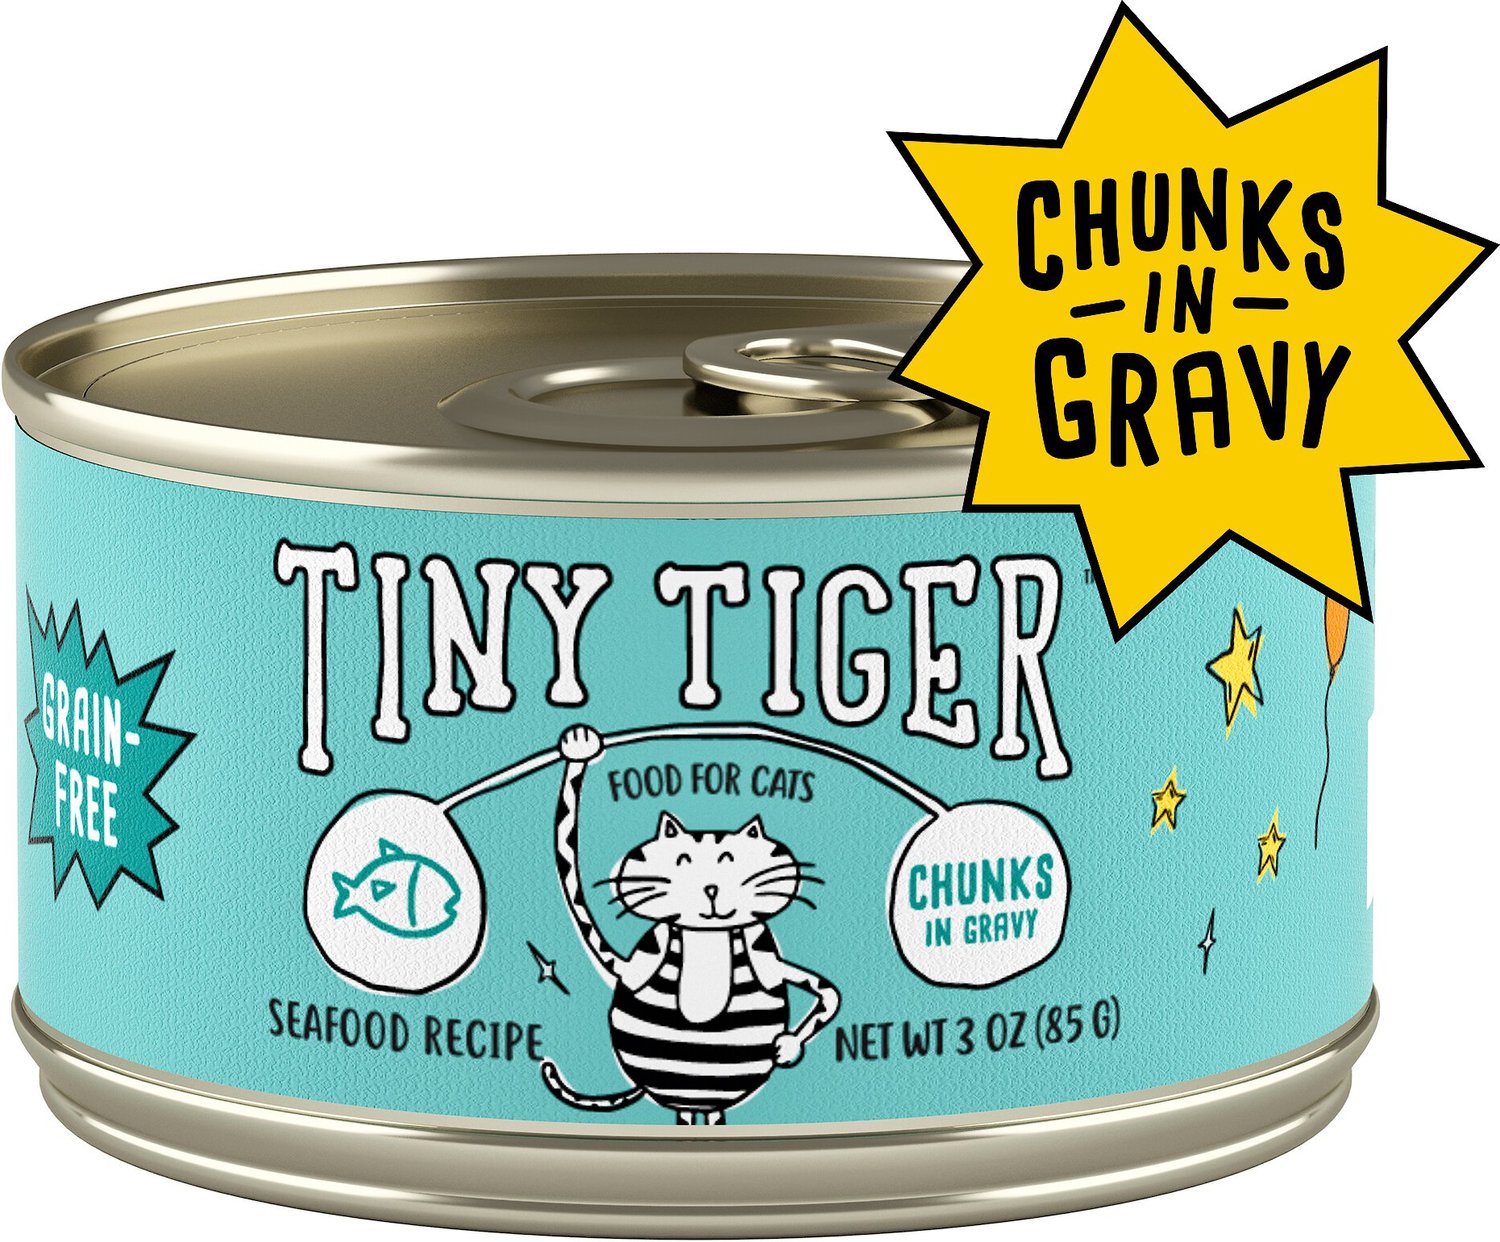 TINY TIGER Chunks in Gravy Seafood Recipe GrainFree Canned Cat Food, 3